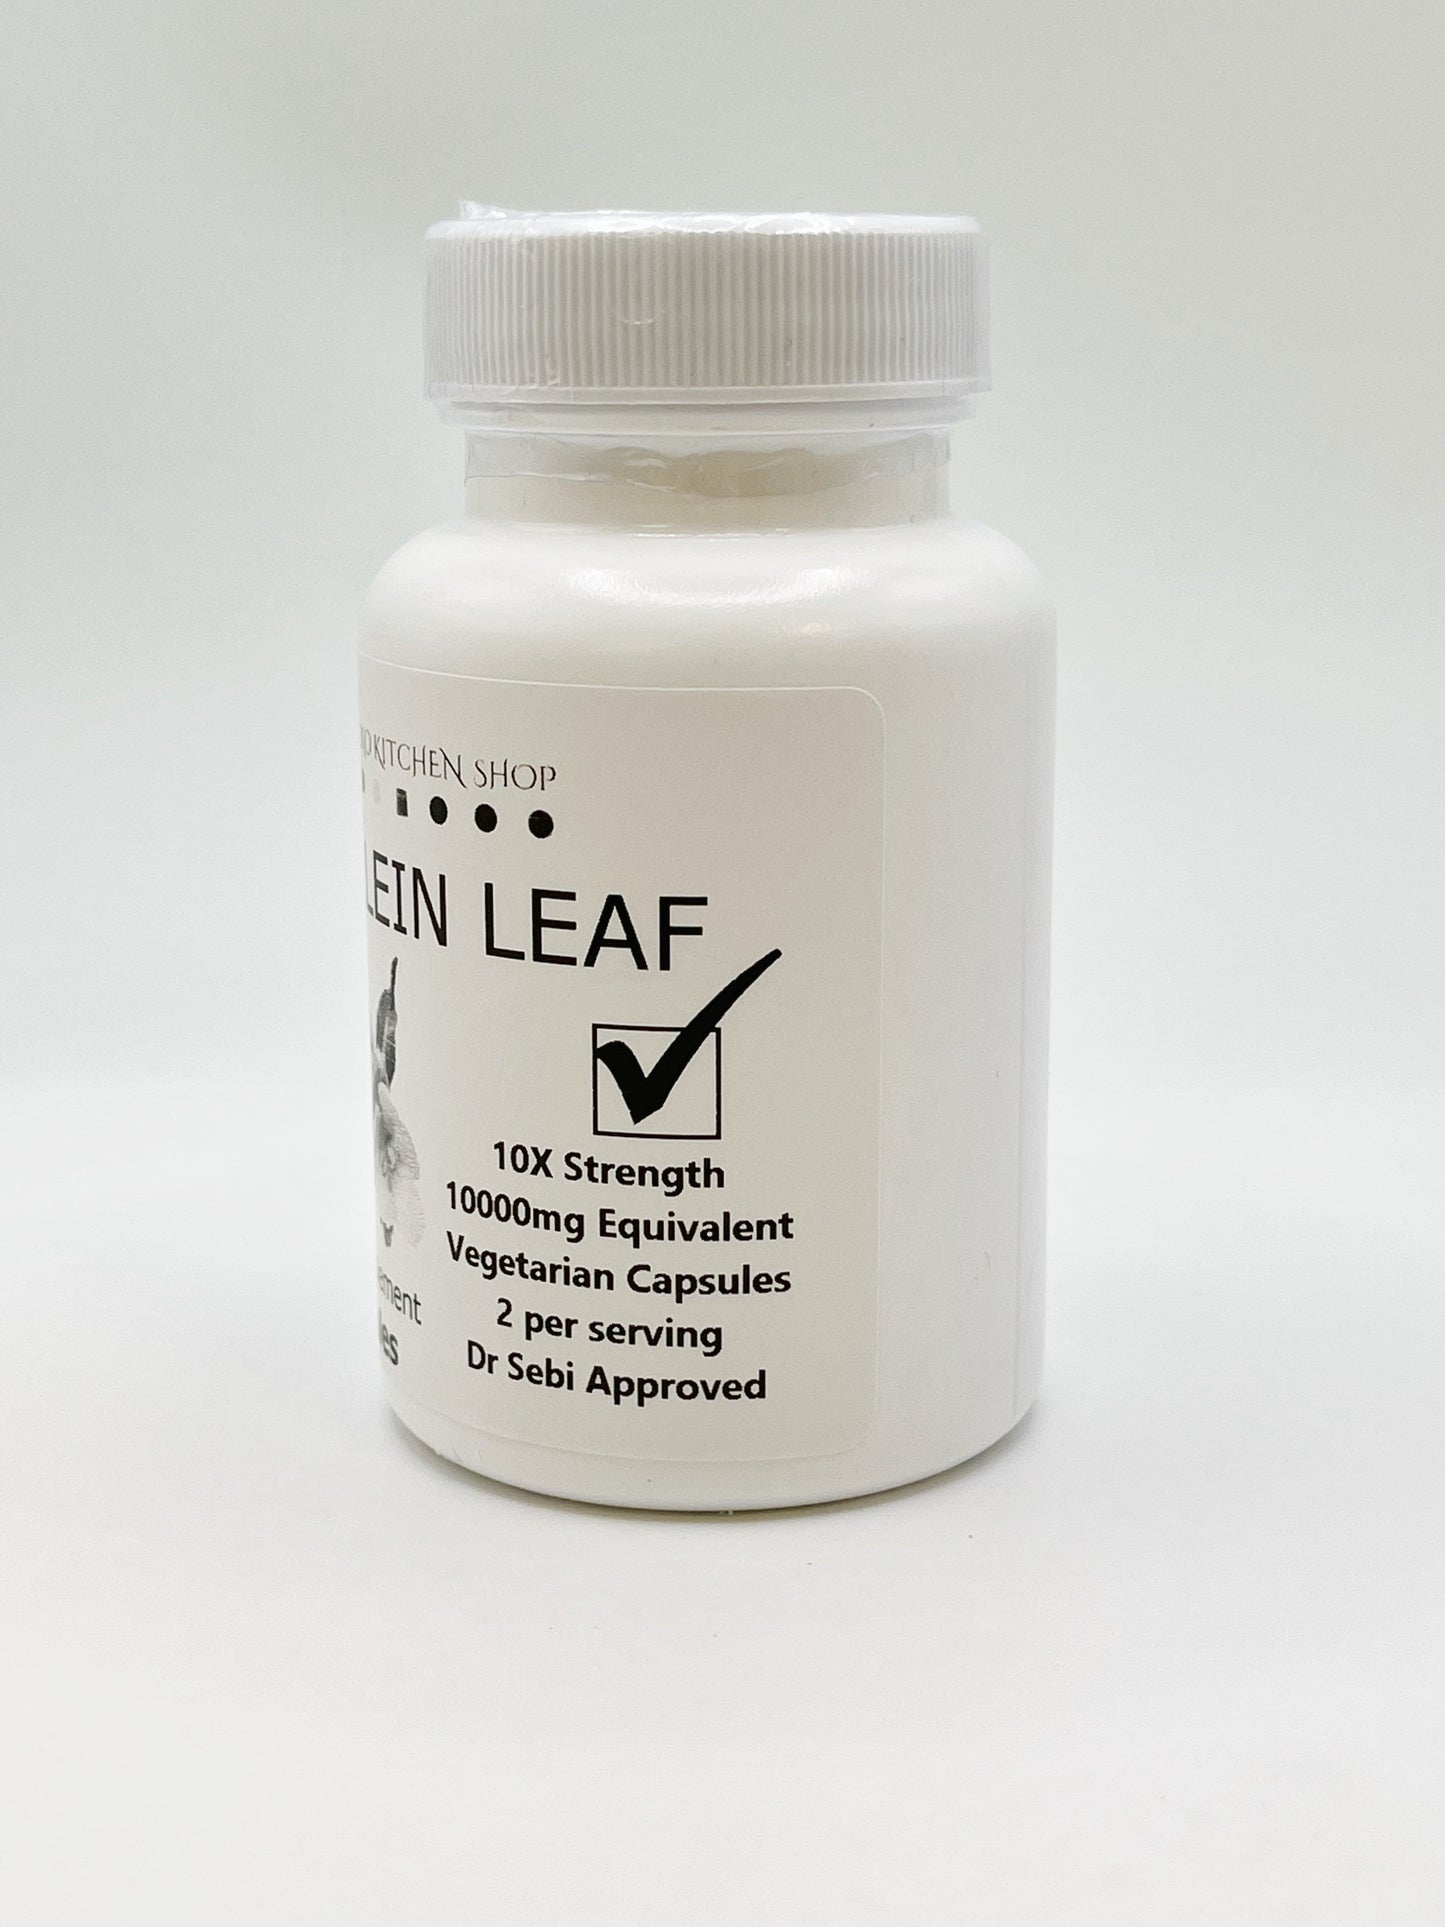 Mullein Leaf Capsules | High Potency | Recurring Delivery